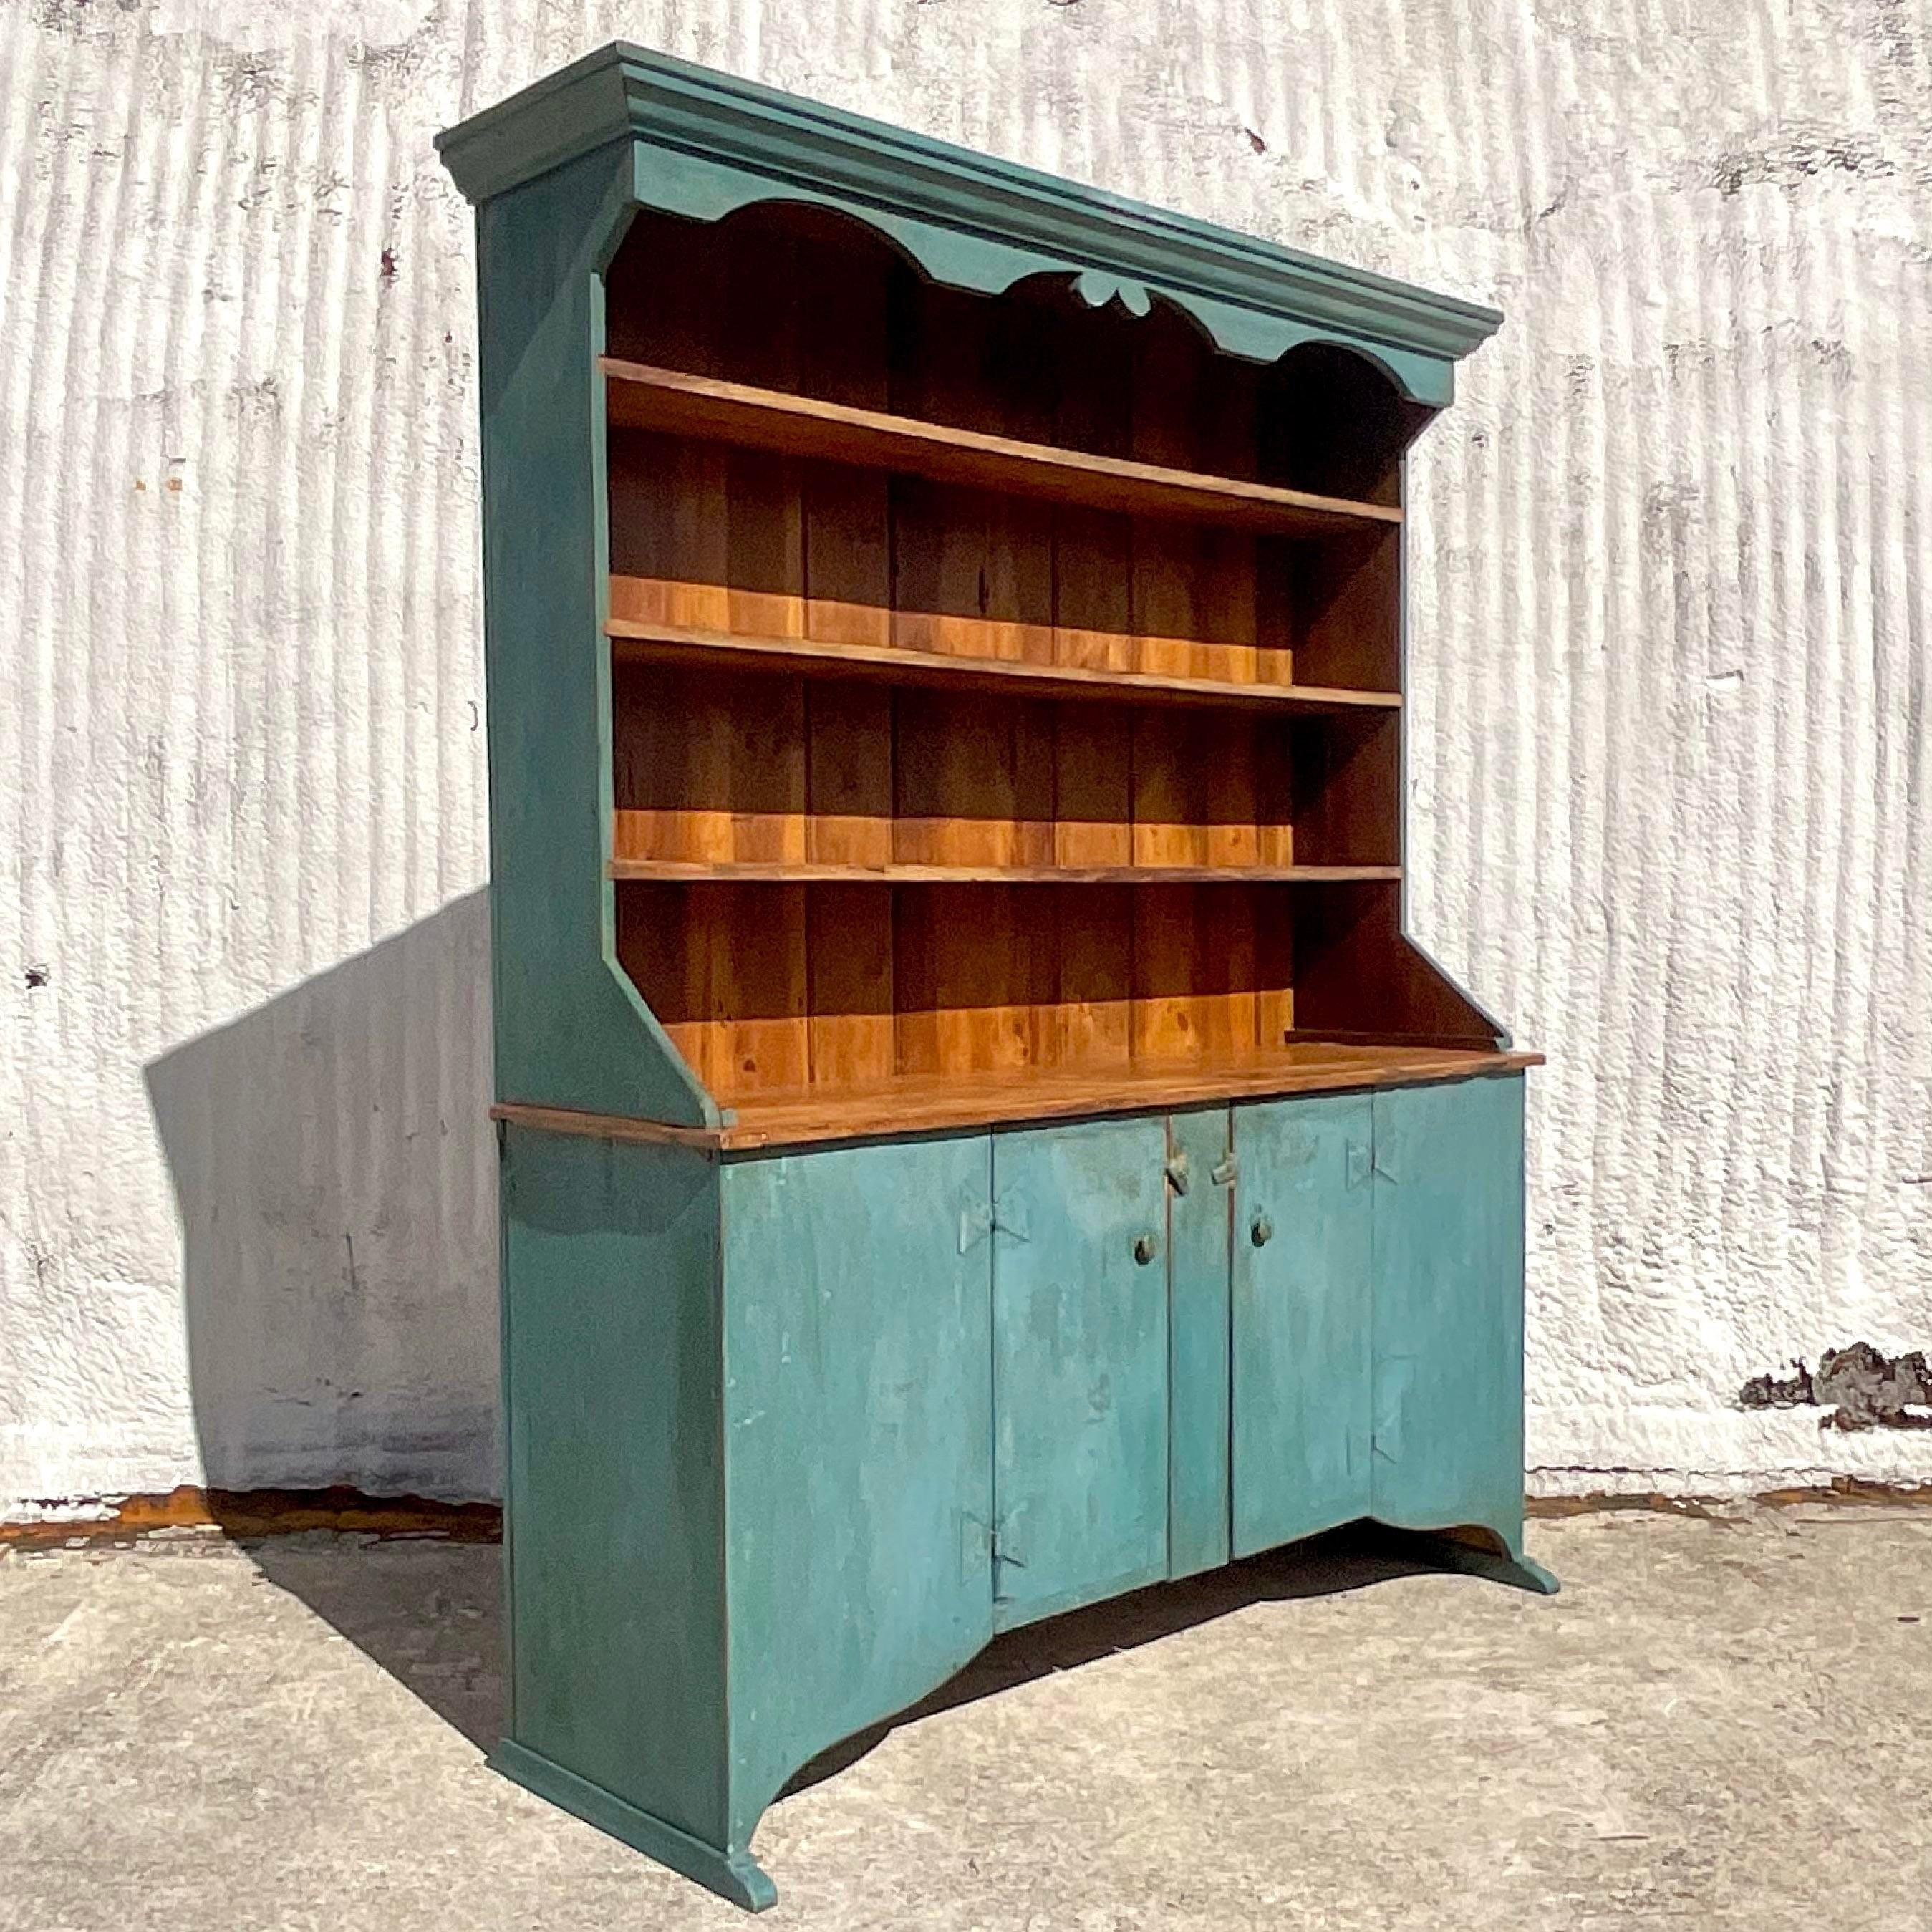 A fabulous vintage Boho Display hutch. A brilliant teal with a natural wood interior. Acquired at a Palm Beach estate.